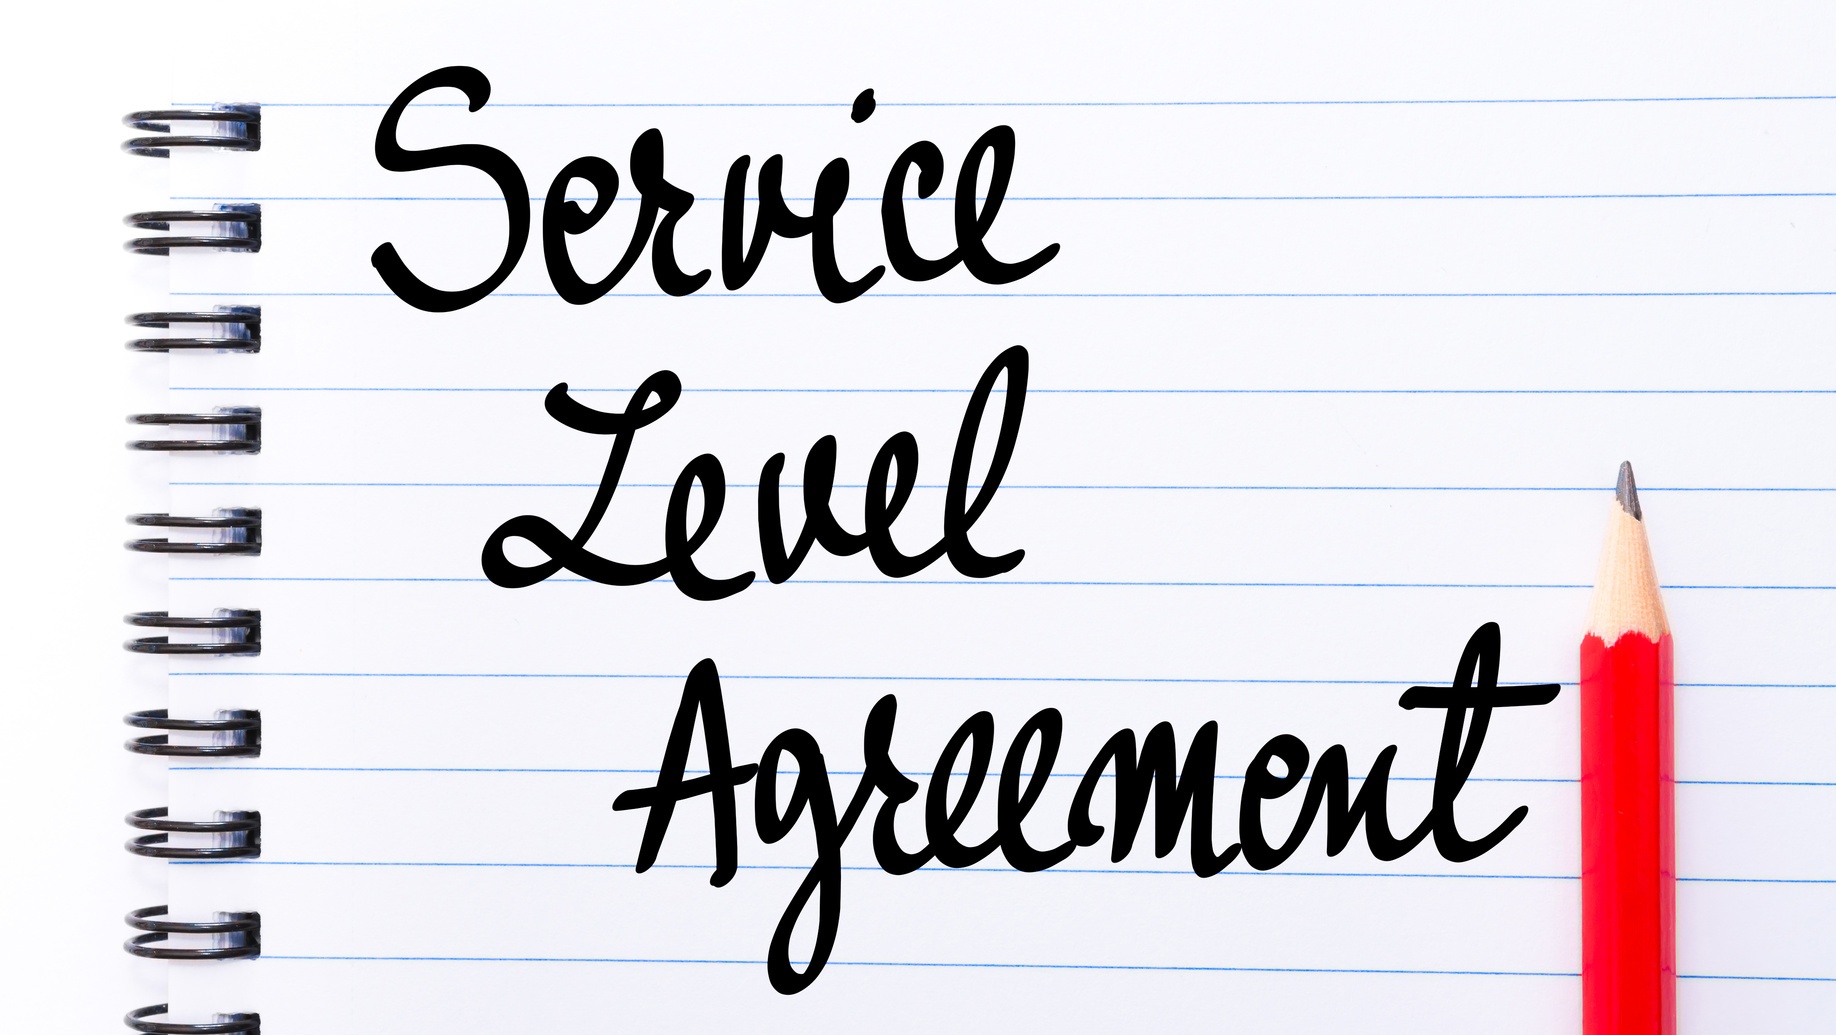 Put Dollar Values on Your Marketing-Sales Service Level Agreements